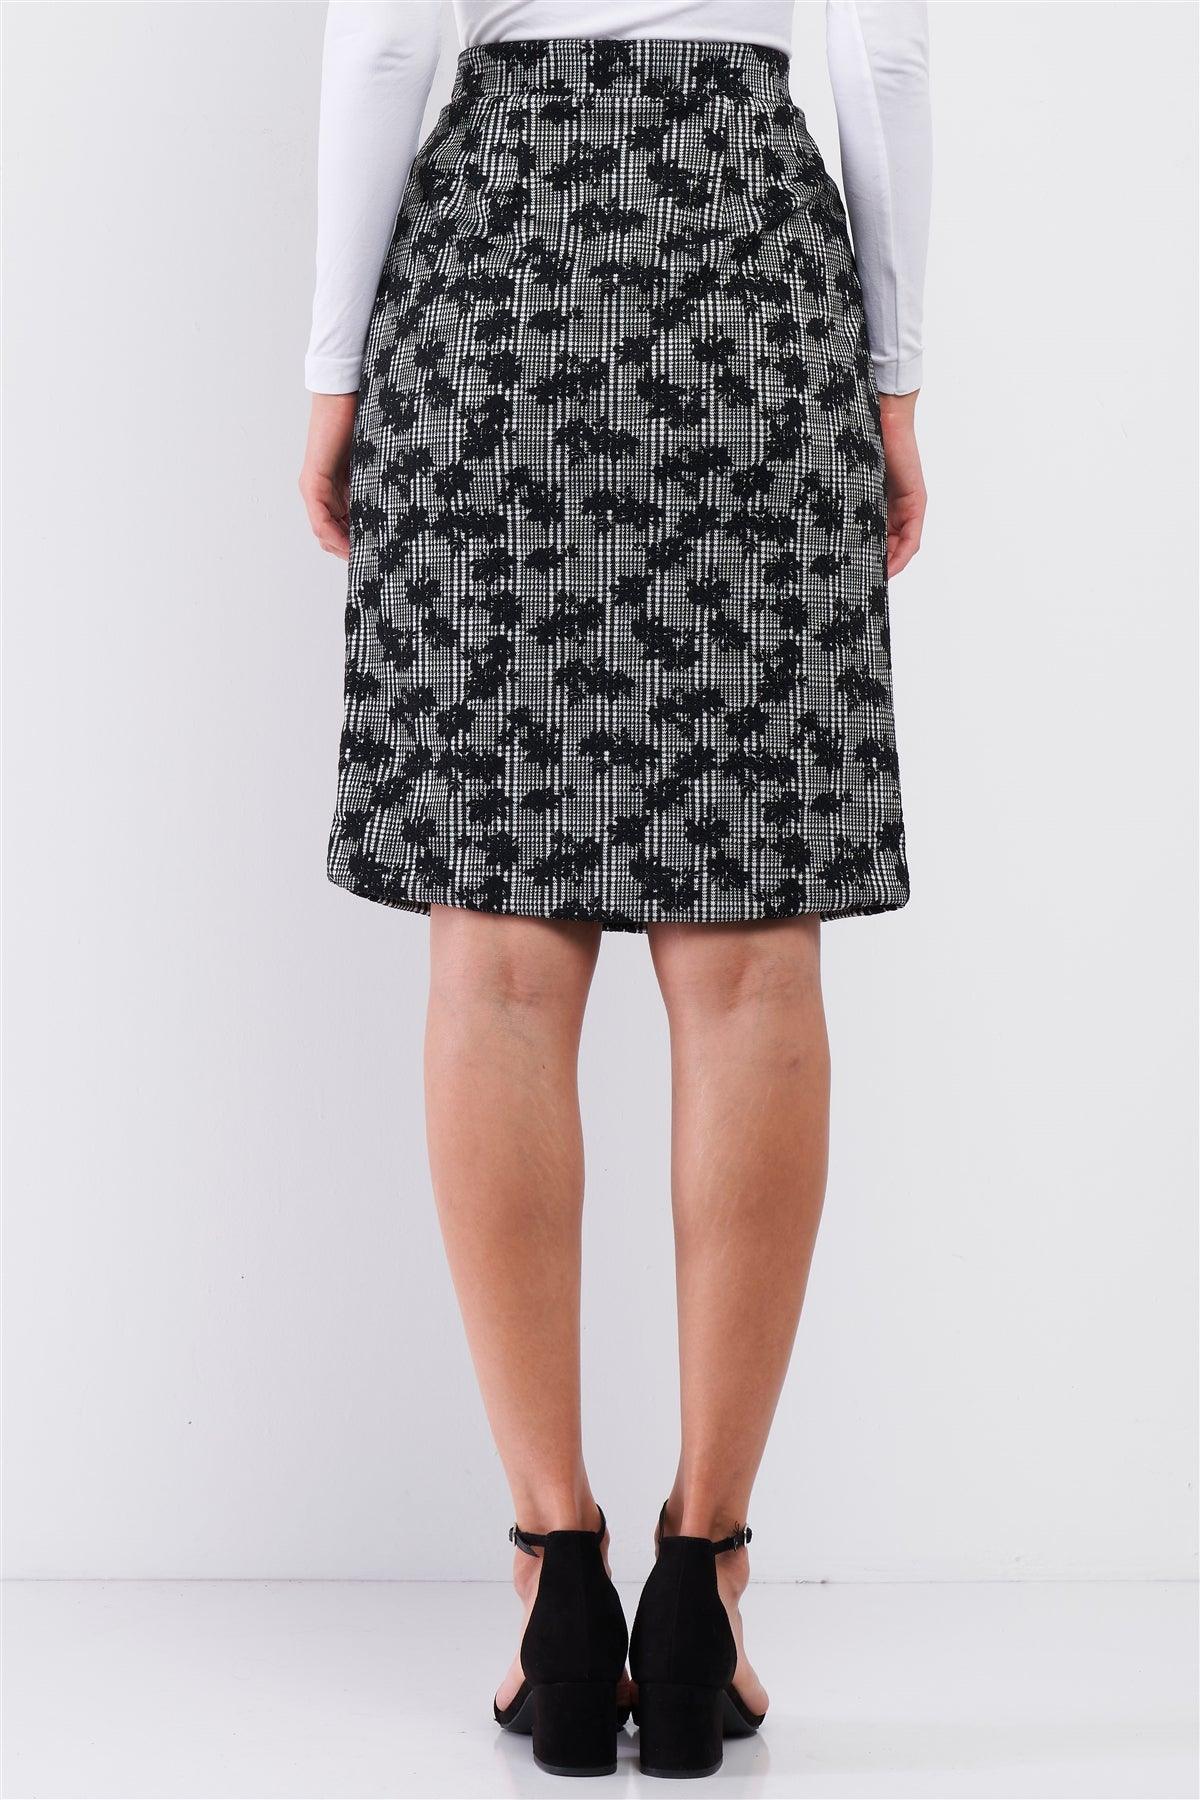 Black And White Checkered And Floral Print High Waisted Pencil Skirt / 1-2-2-1